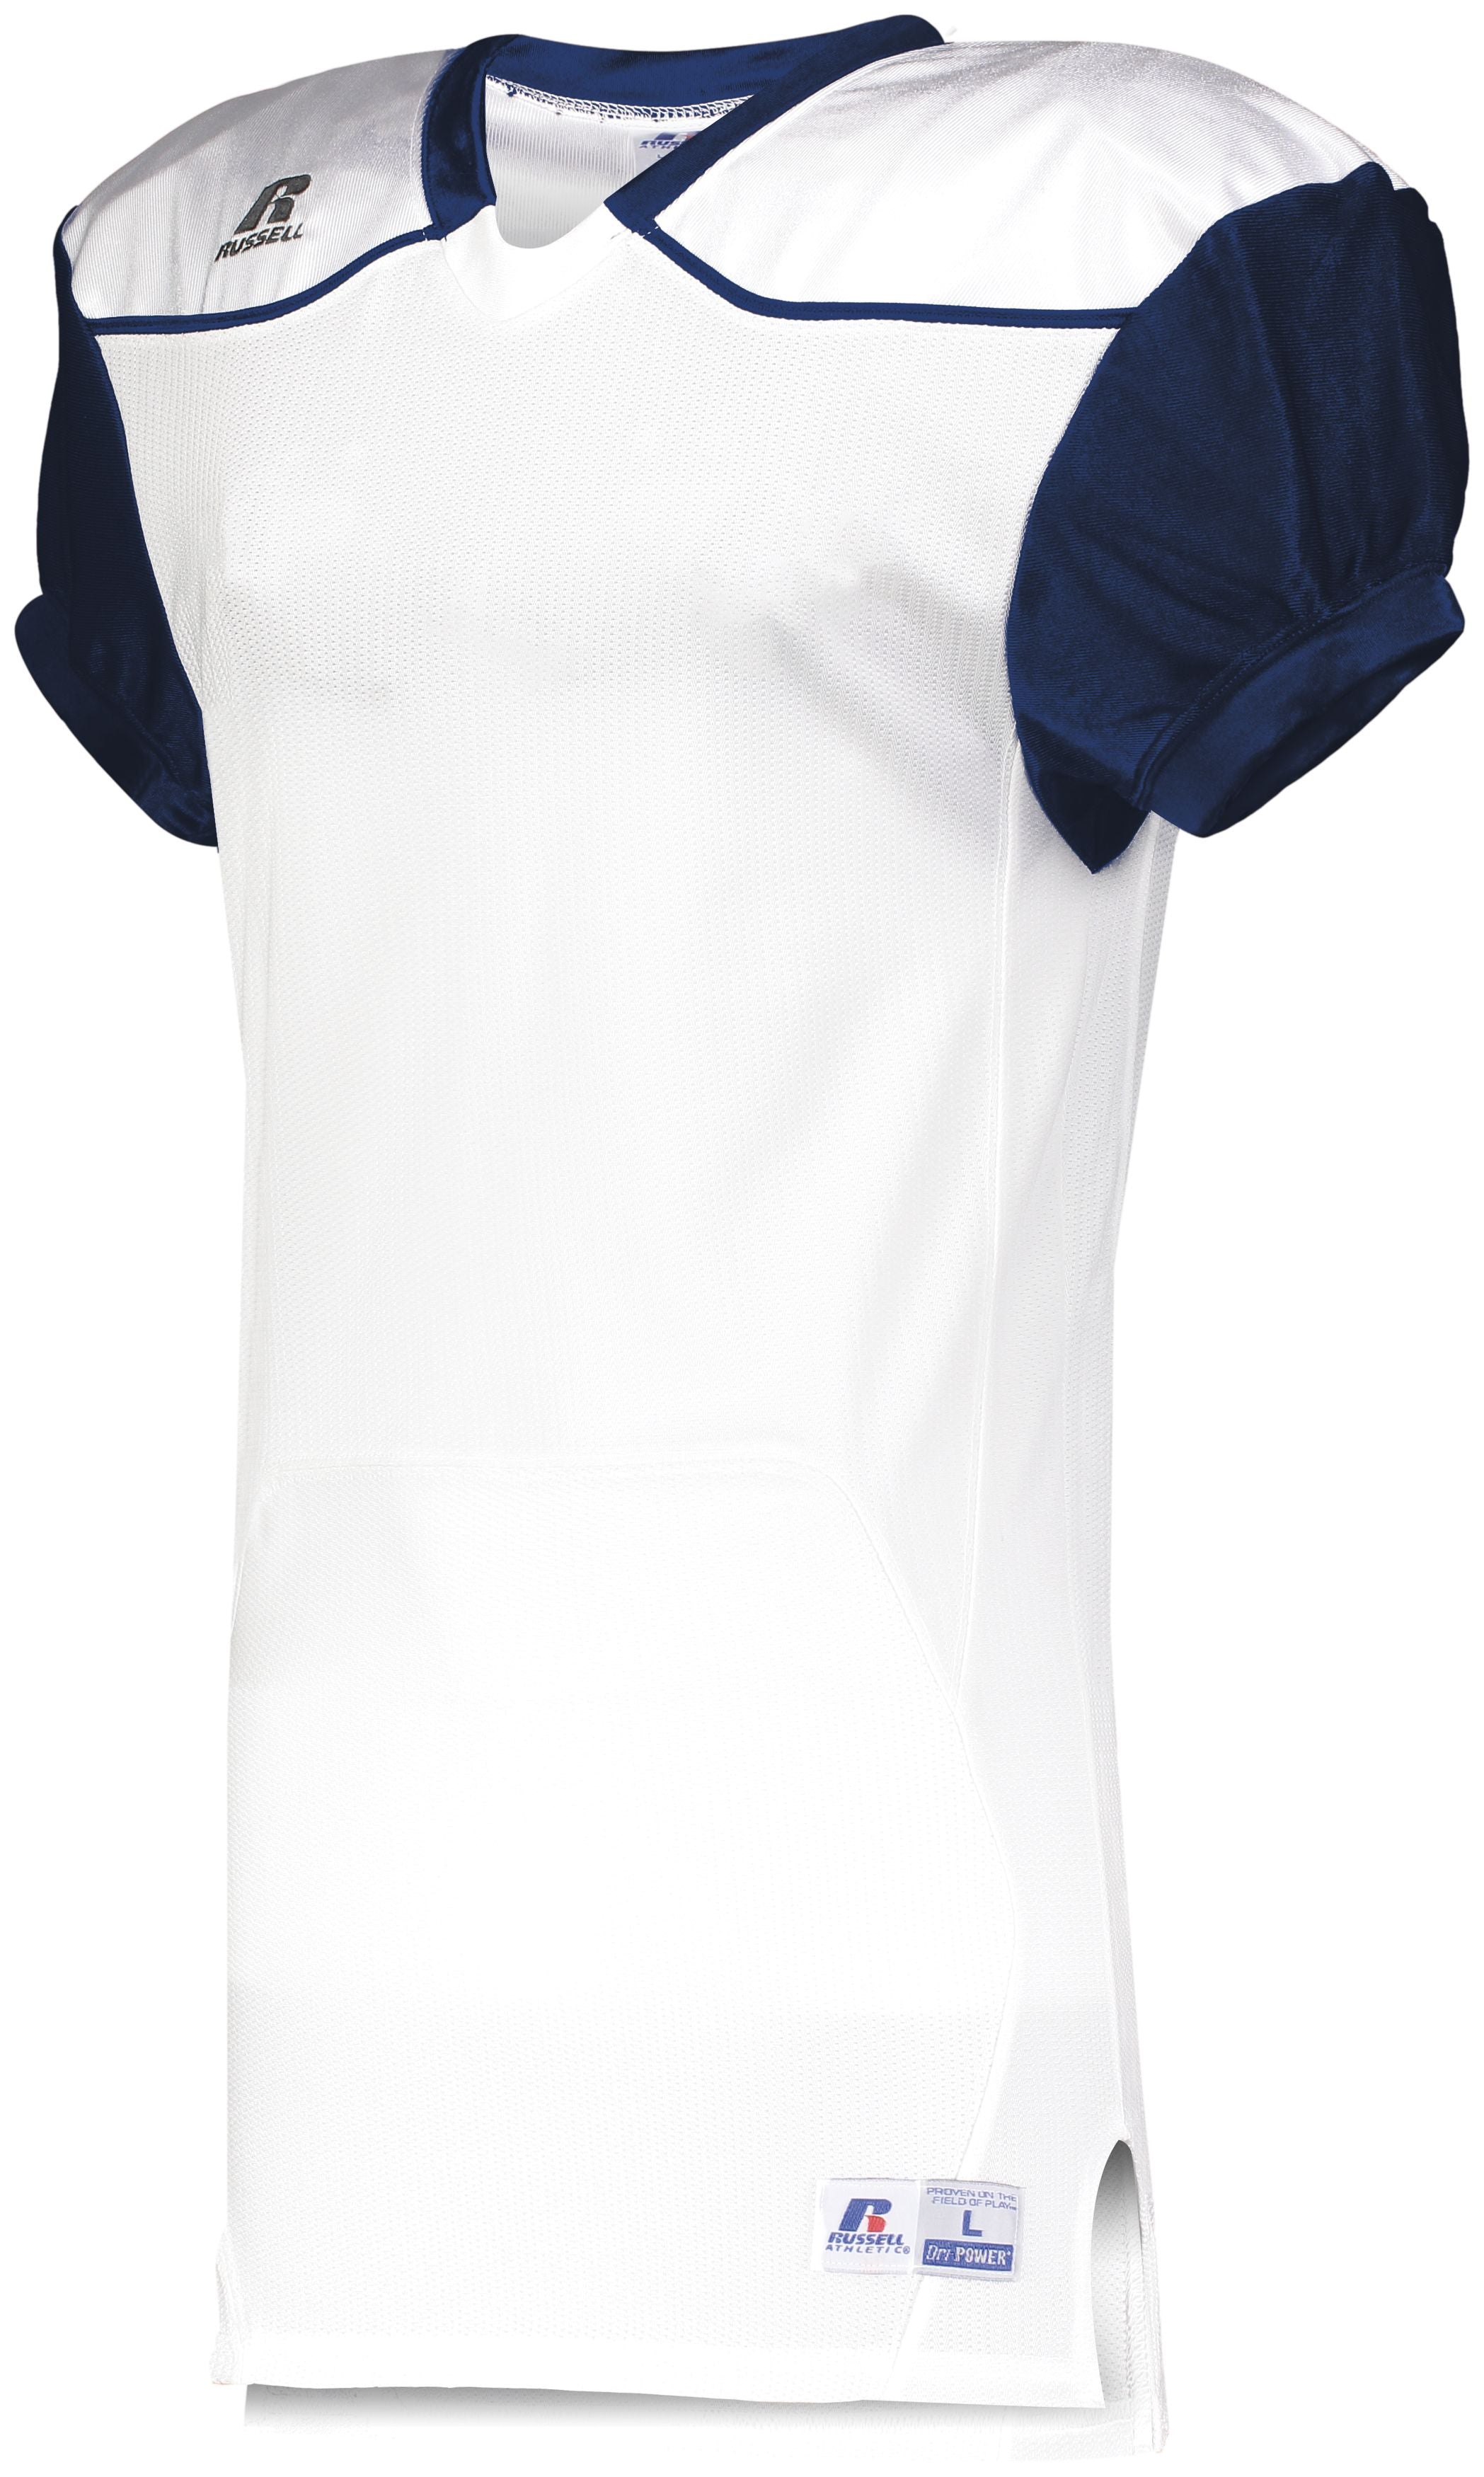 Russell Athletic Color Block Game Jersey (Away) in White/Navy  -Part of the Adult, Adult-Jersey, Football, Russell-Athletic-Products, Shirts, All-Sports, All-Sports-1 product lines at KanaleyCreations.com